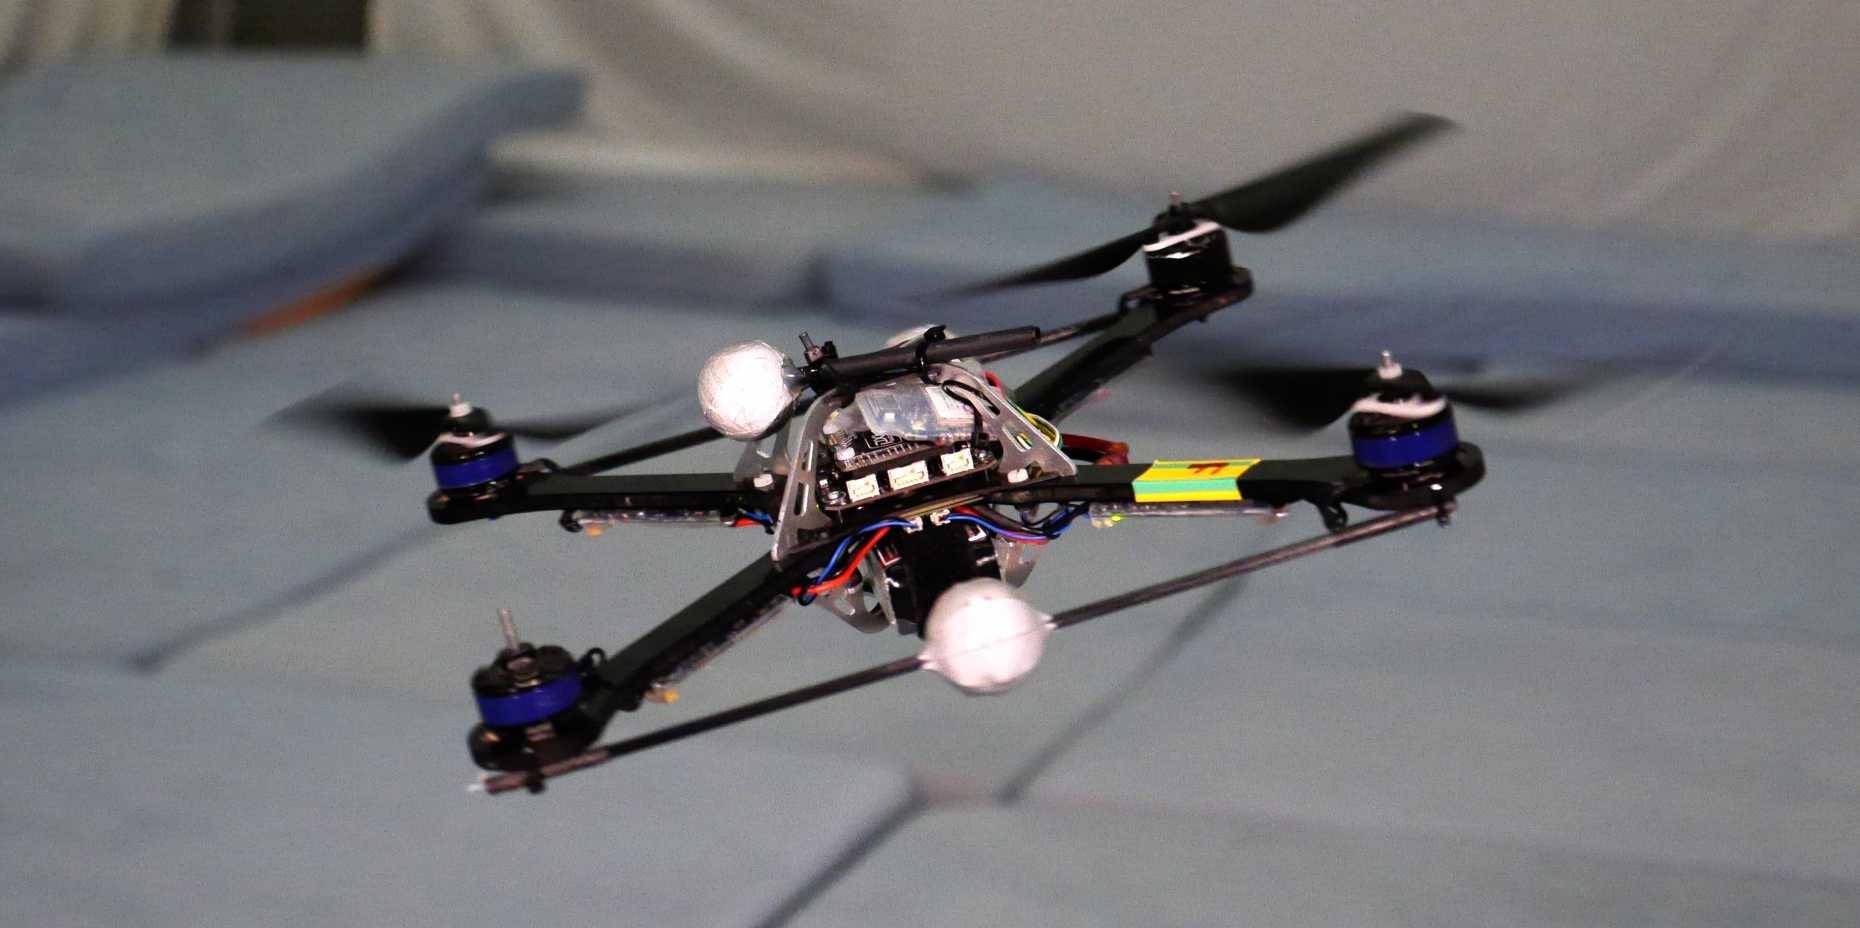 Enlarged view: Quadcopter flying with only three propellers